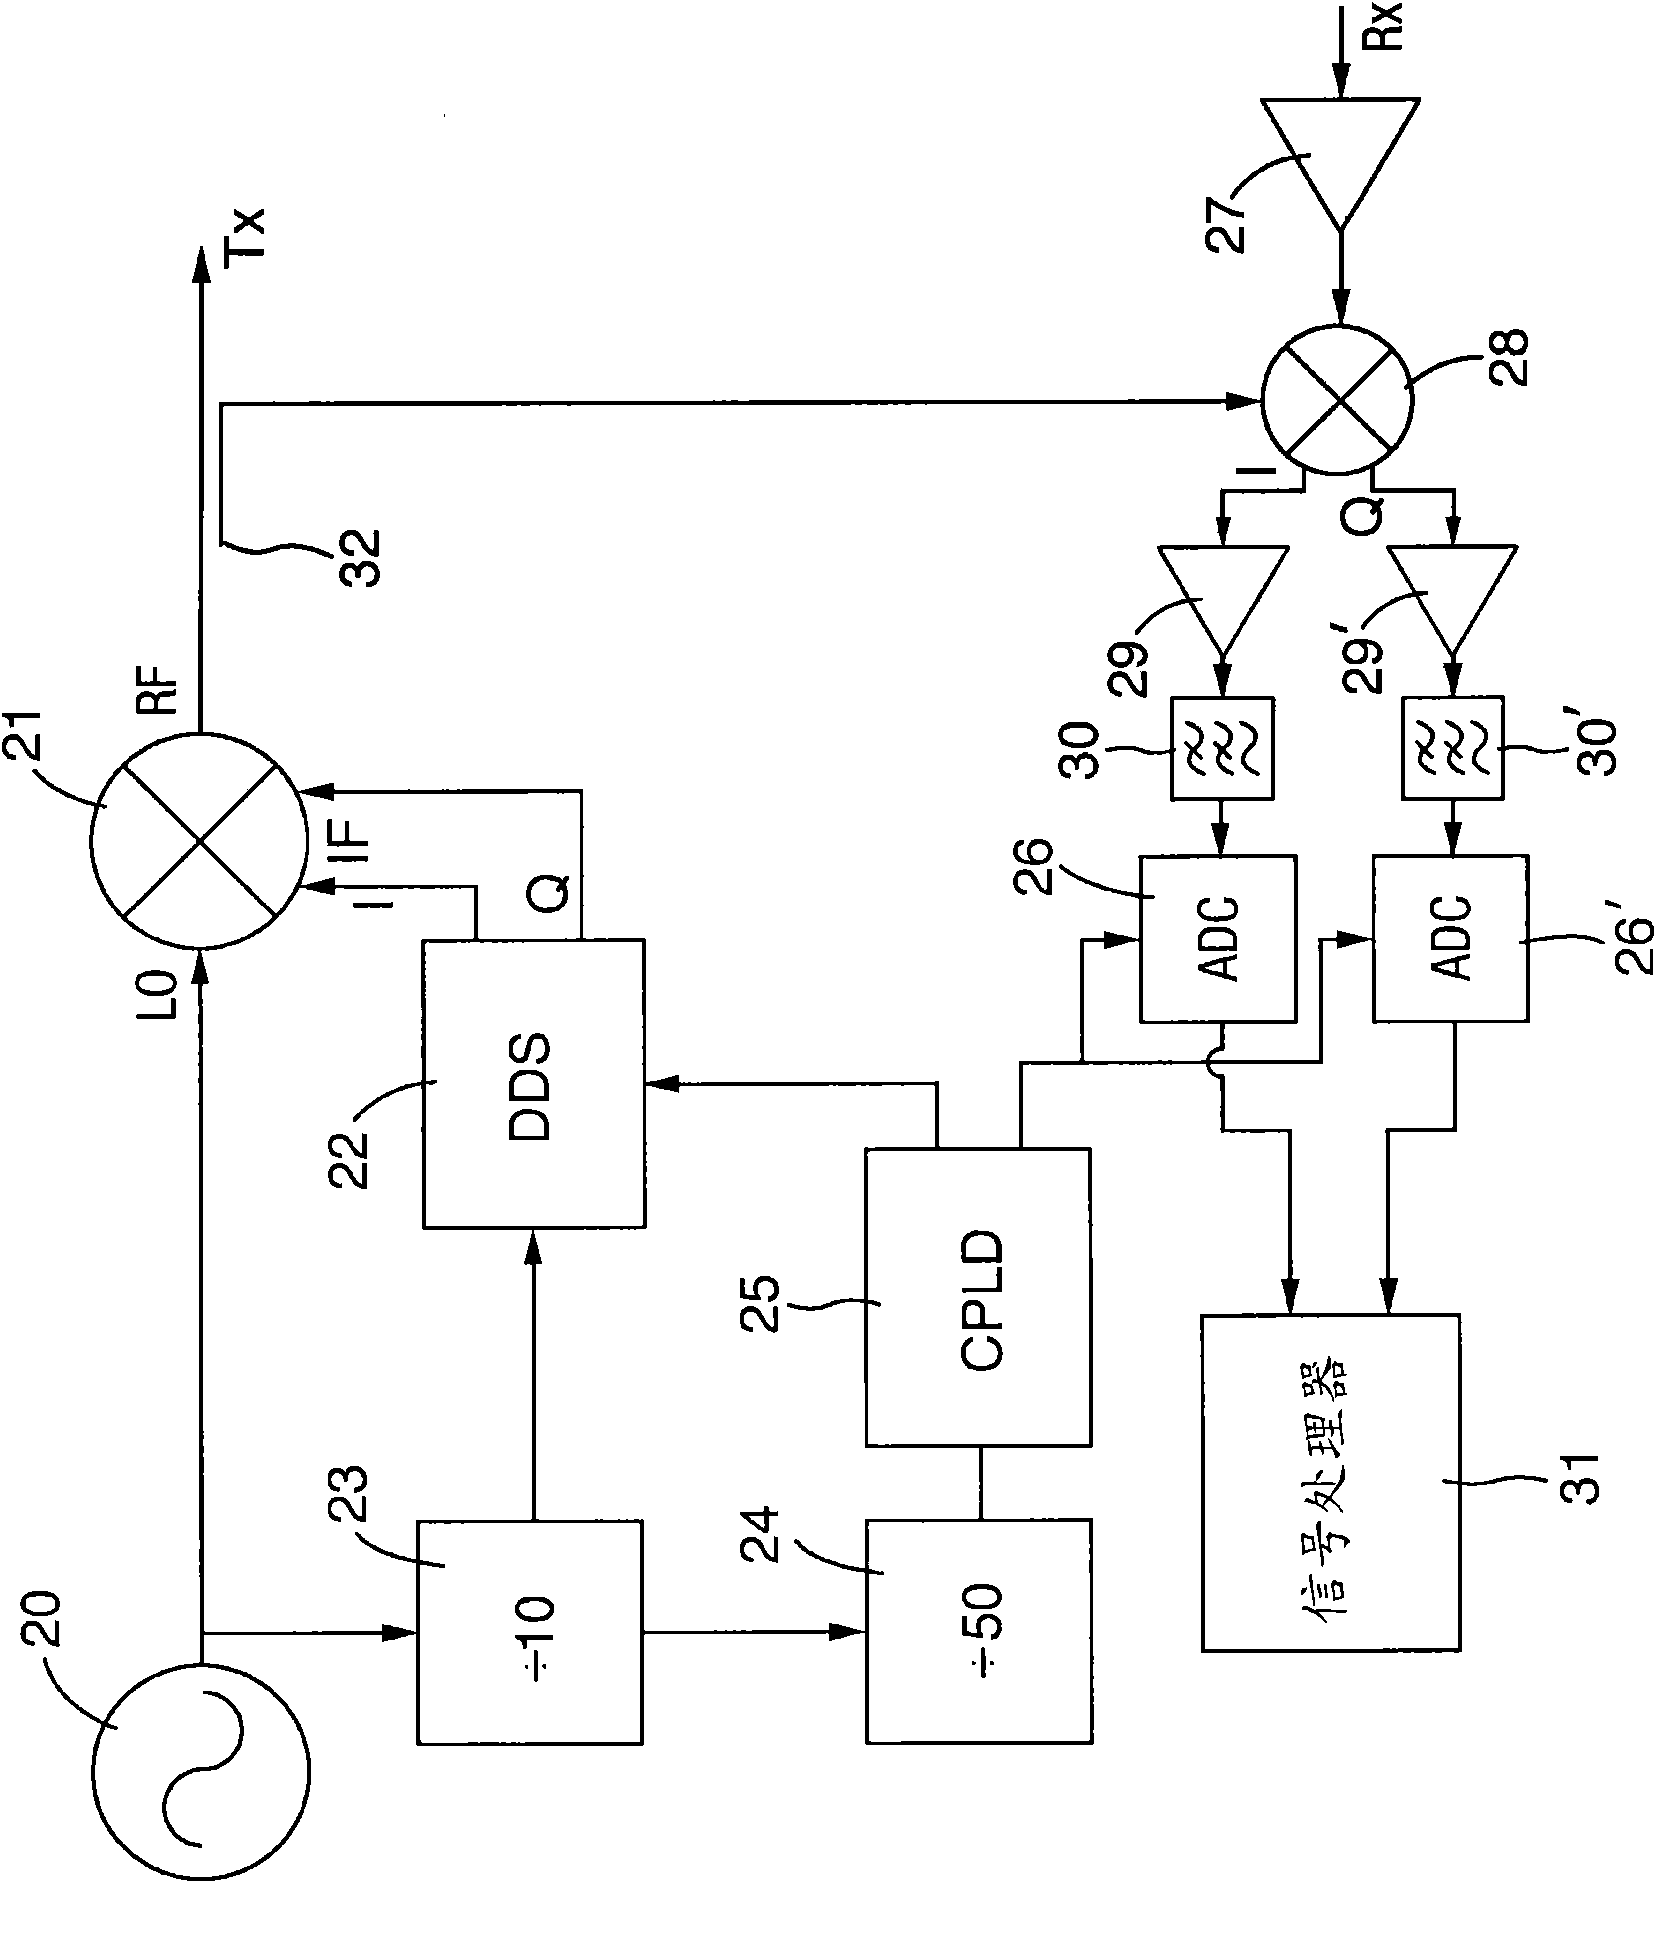 Low noise generator for frequency swept signals